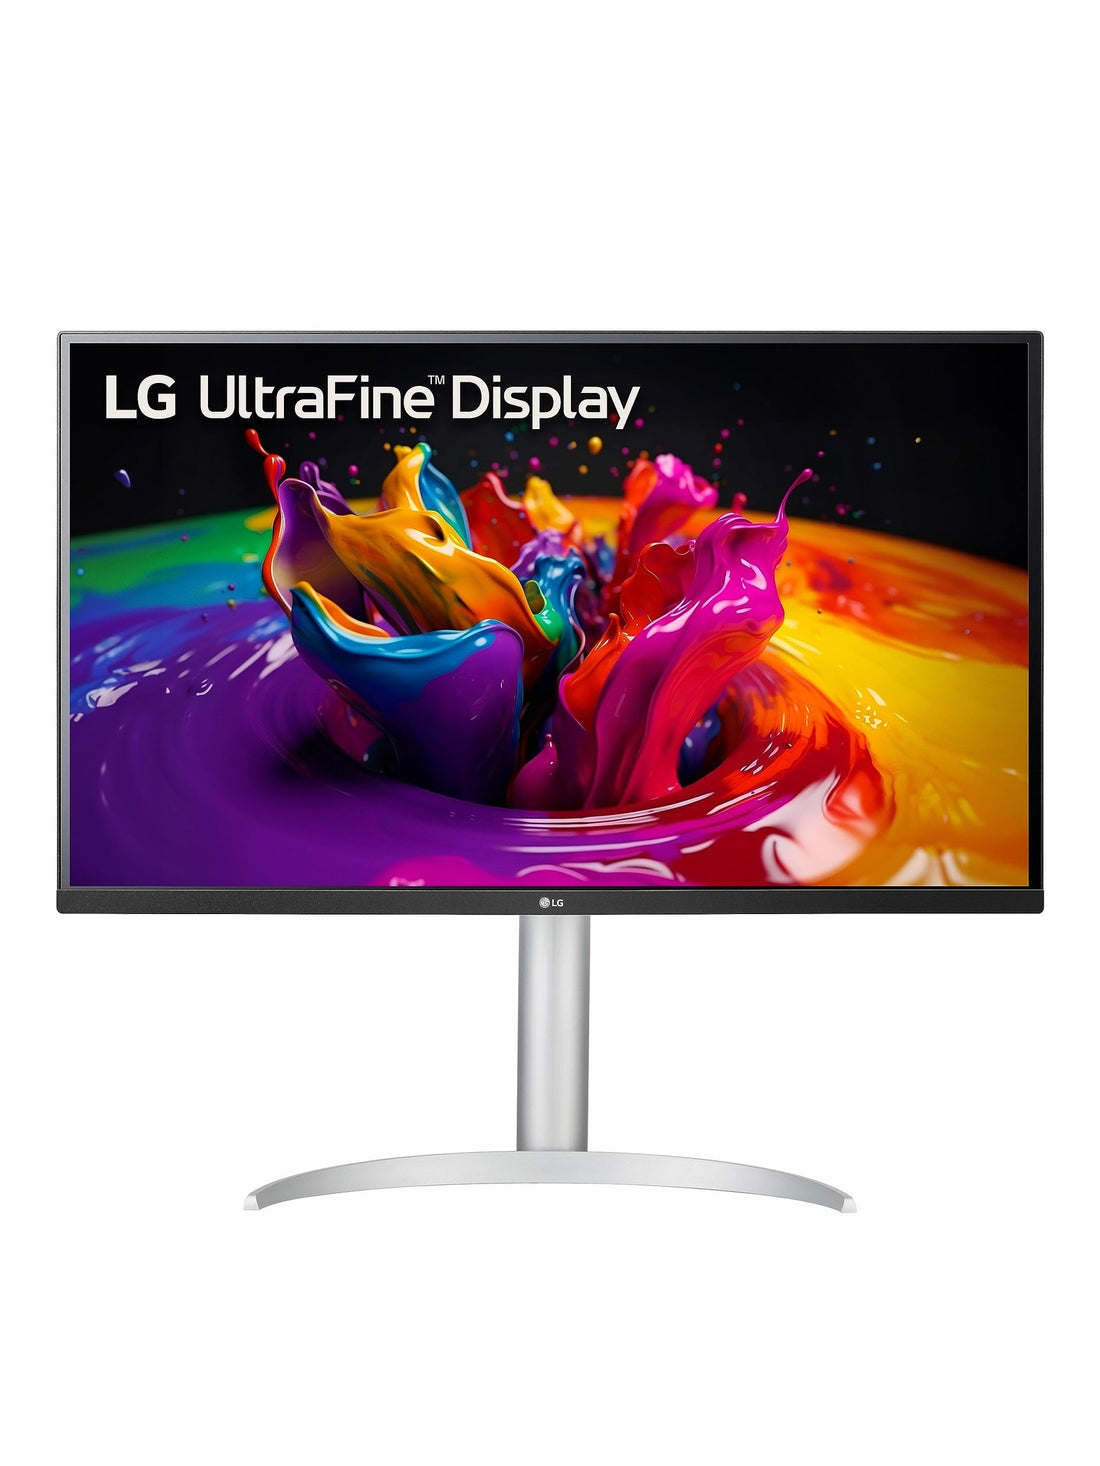 LG UltraFine 31.5-Inch Computer Monitor 32UP83A-W, IPS with HDR 10 Compatibility and AMD FreeSync, White